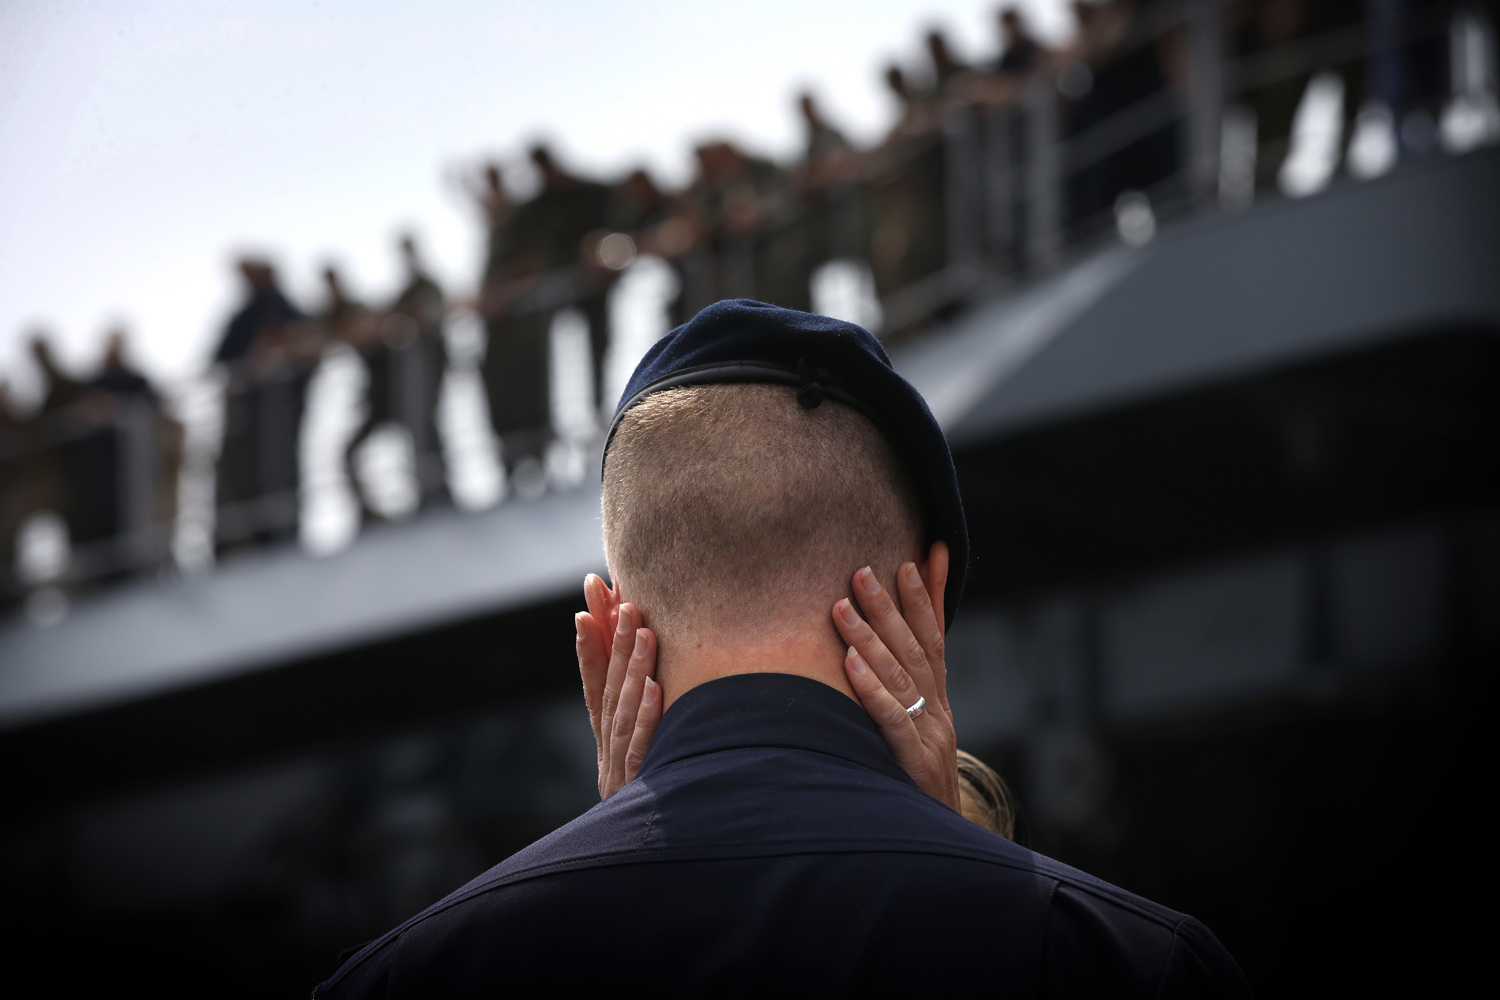 July 14, 2013. A member of the Zr. Ms. Johan de Witt Dutch navy warship says goodbye to a loved one on the quayside in Den Helder, Netherlands.